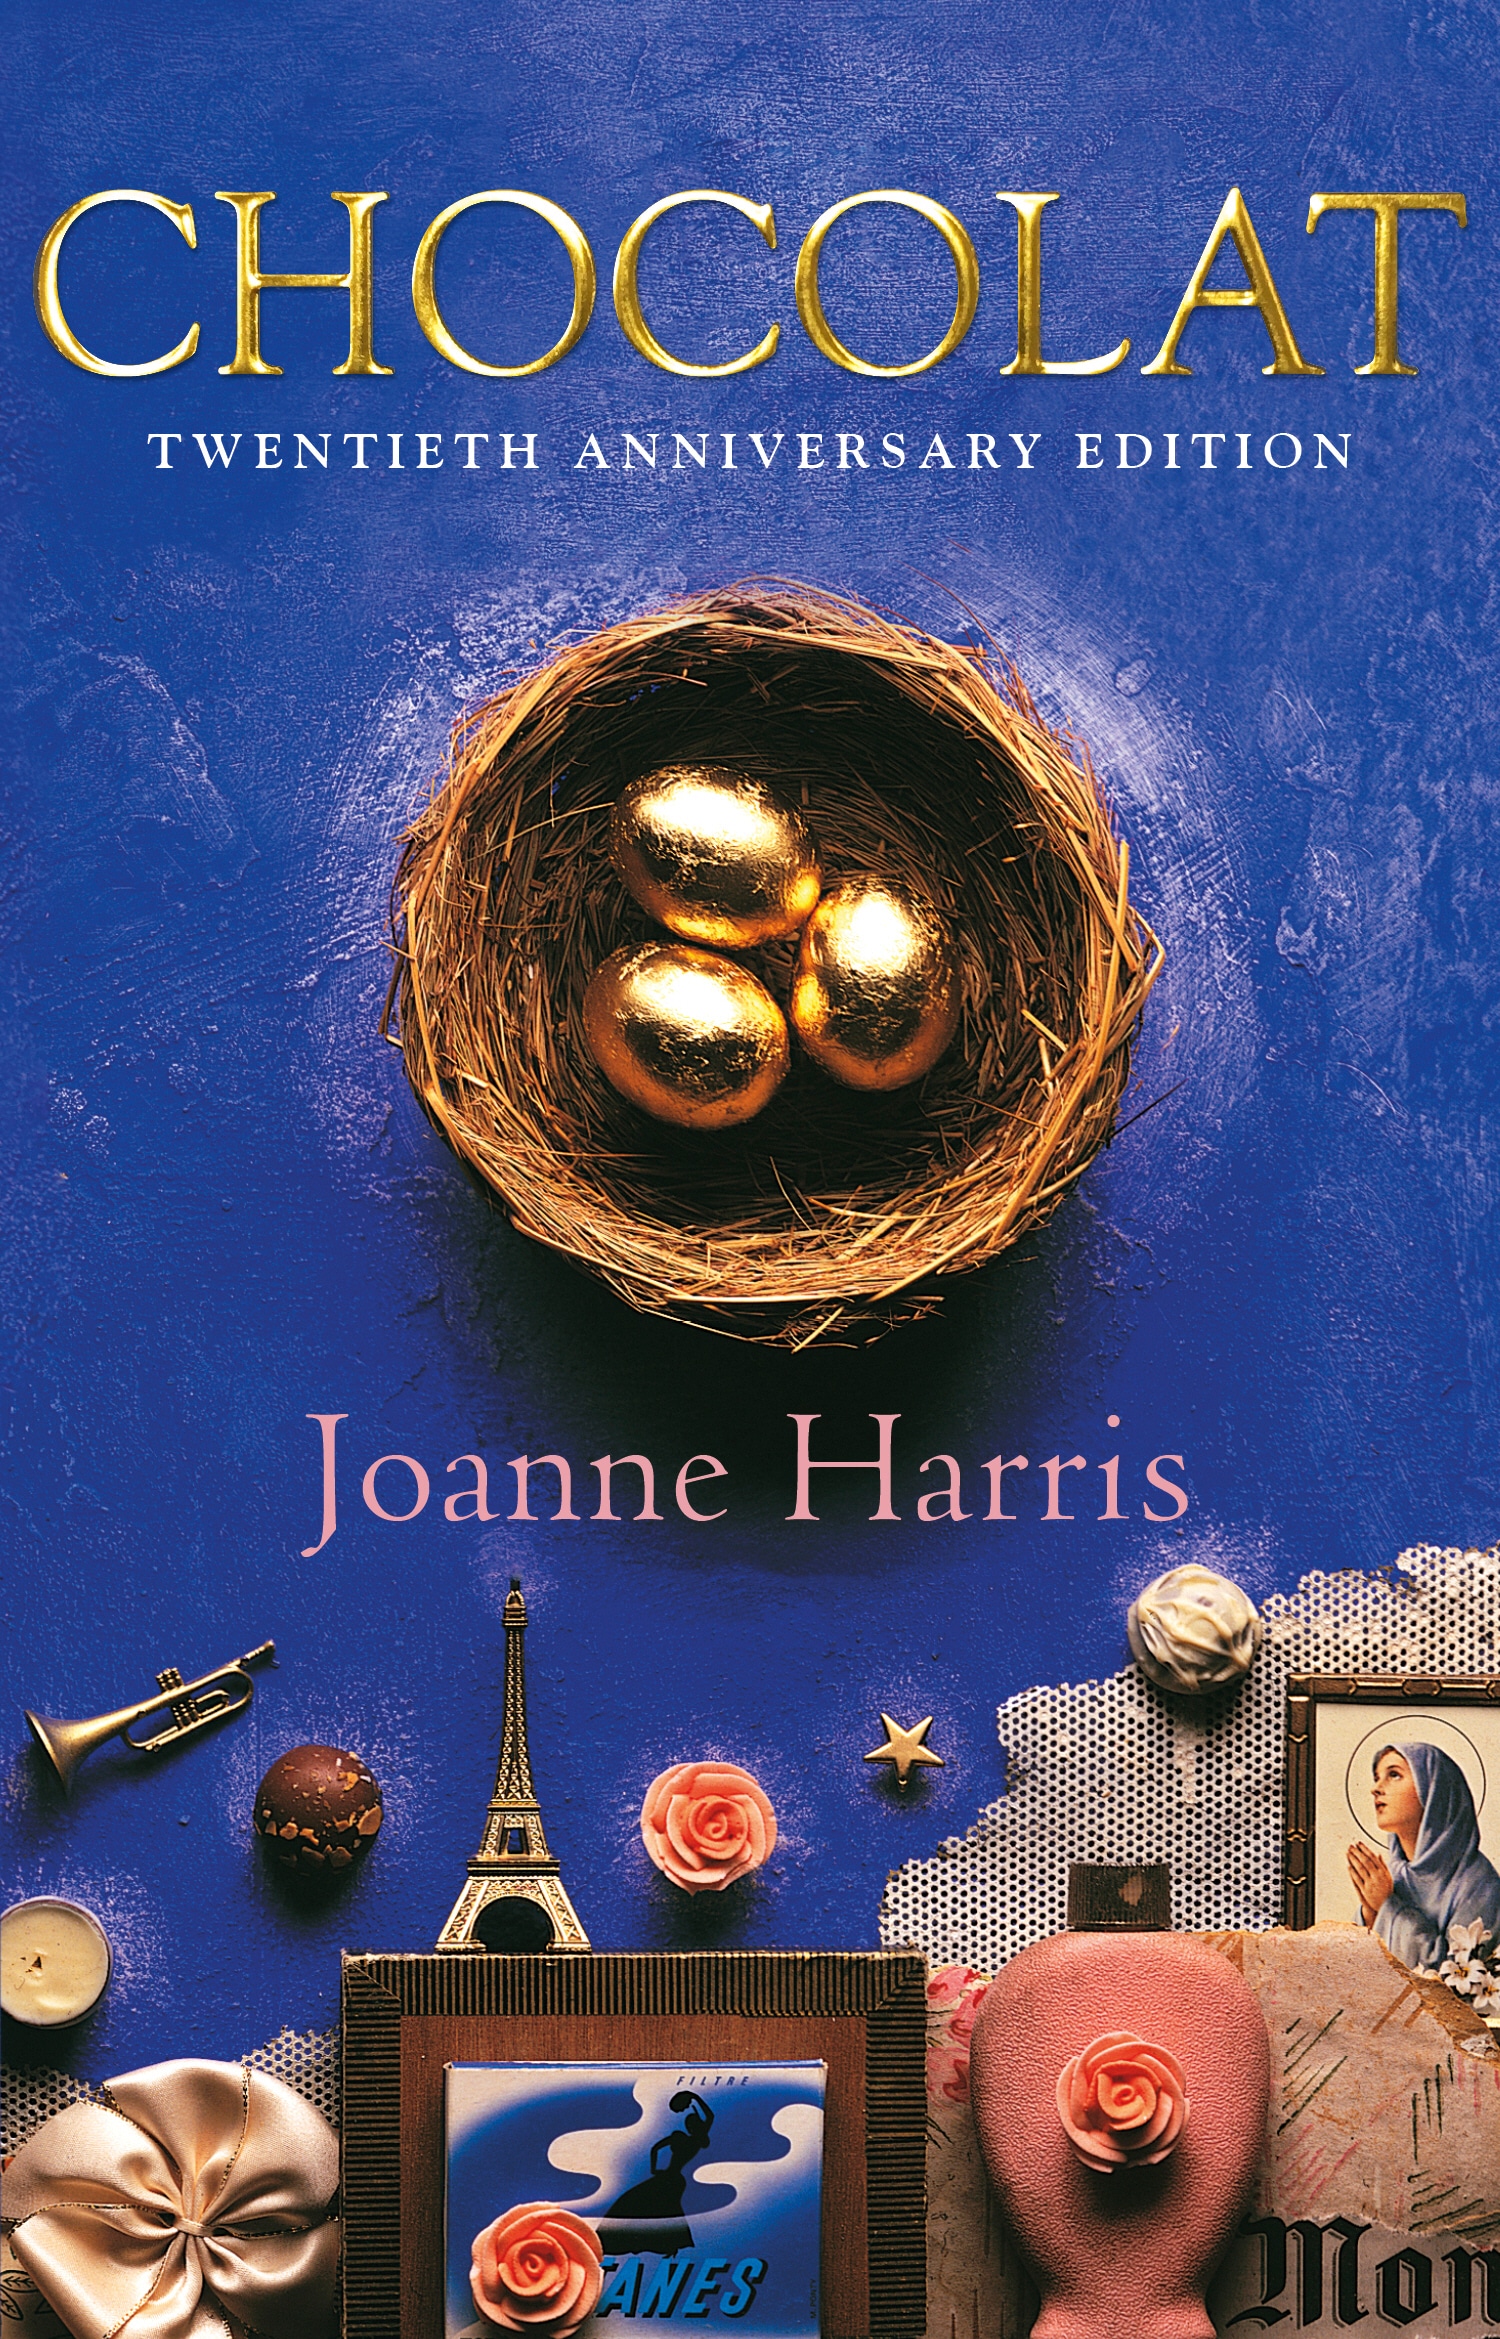 Book “Chocolat” by Joanne Harris — March 4, 1999